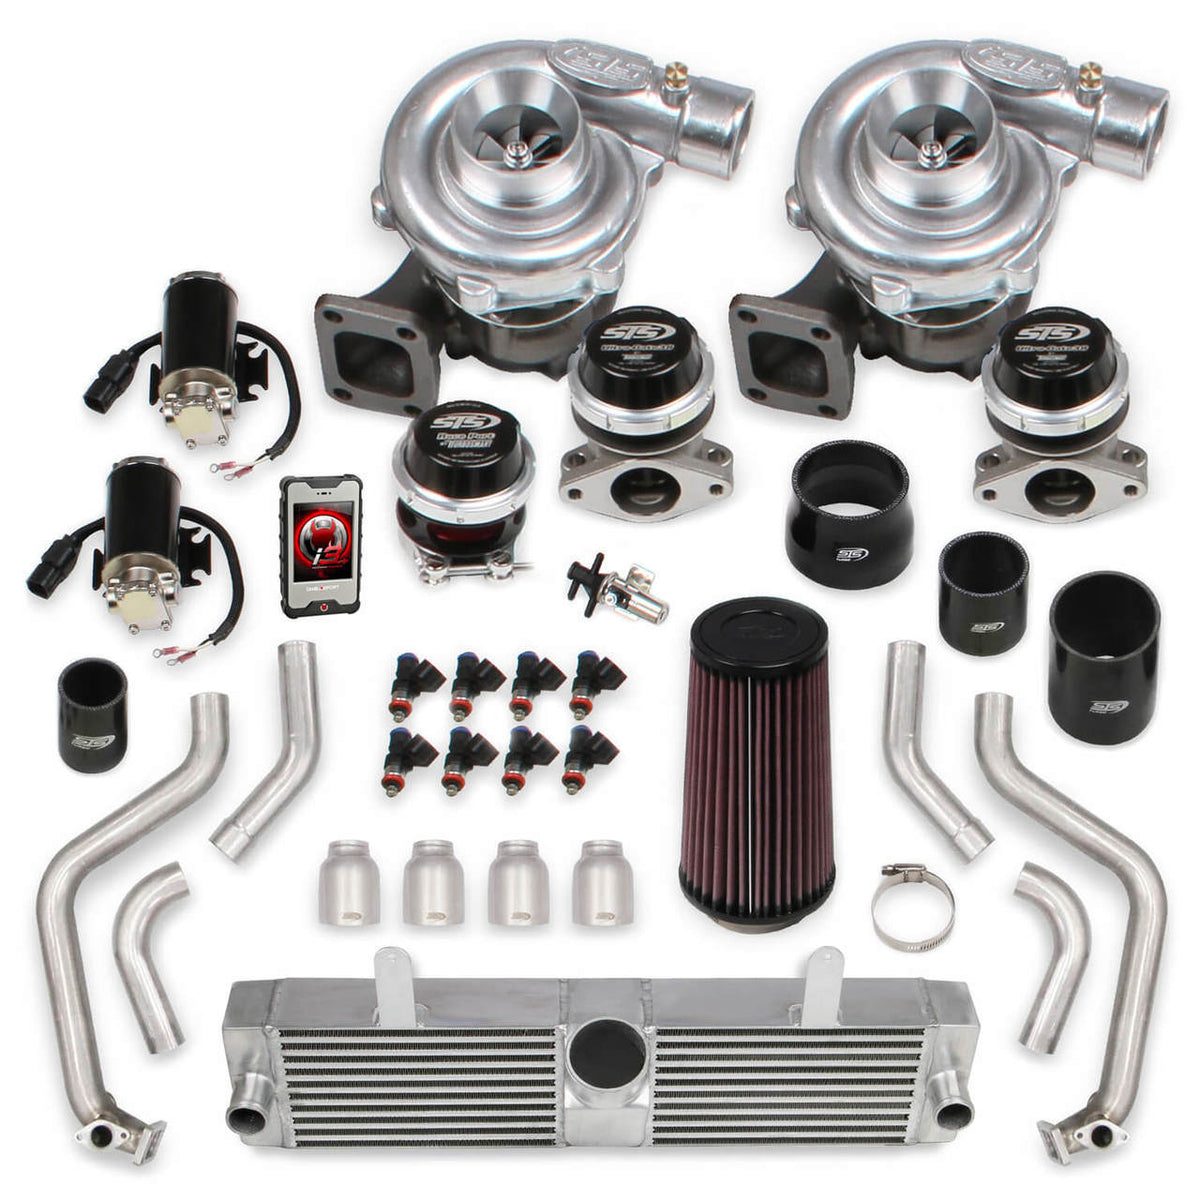 2008 CORVETTE C6 W/LS3 STS REAR MOUNTED TWIN TURBO SYSTEM TUNING KIT